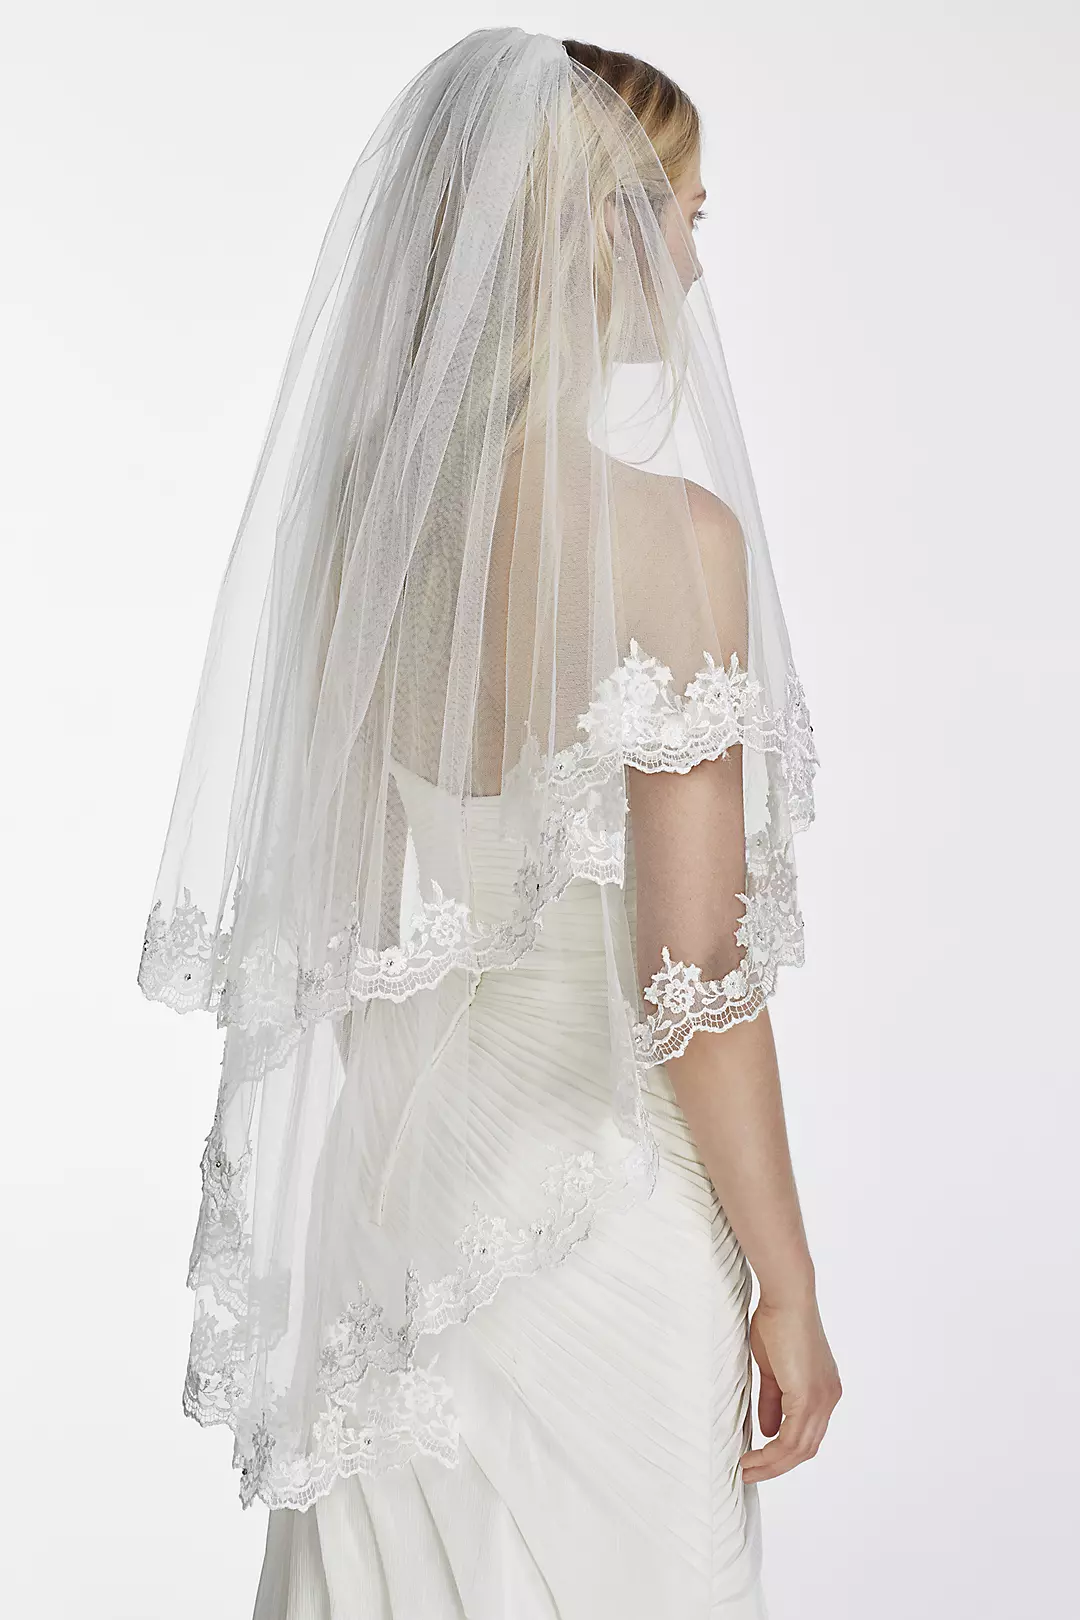 Two Tier Mid Length Veil with Crystals and Lace   Image